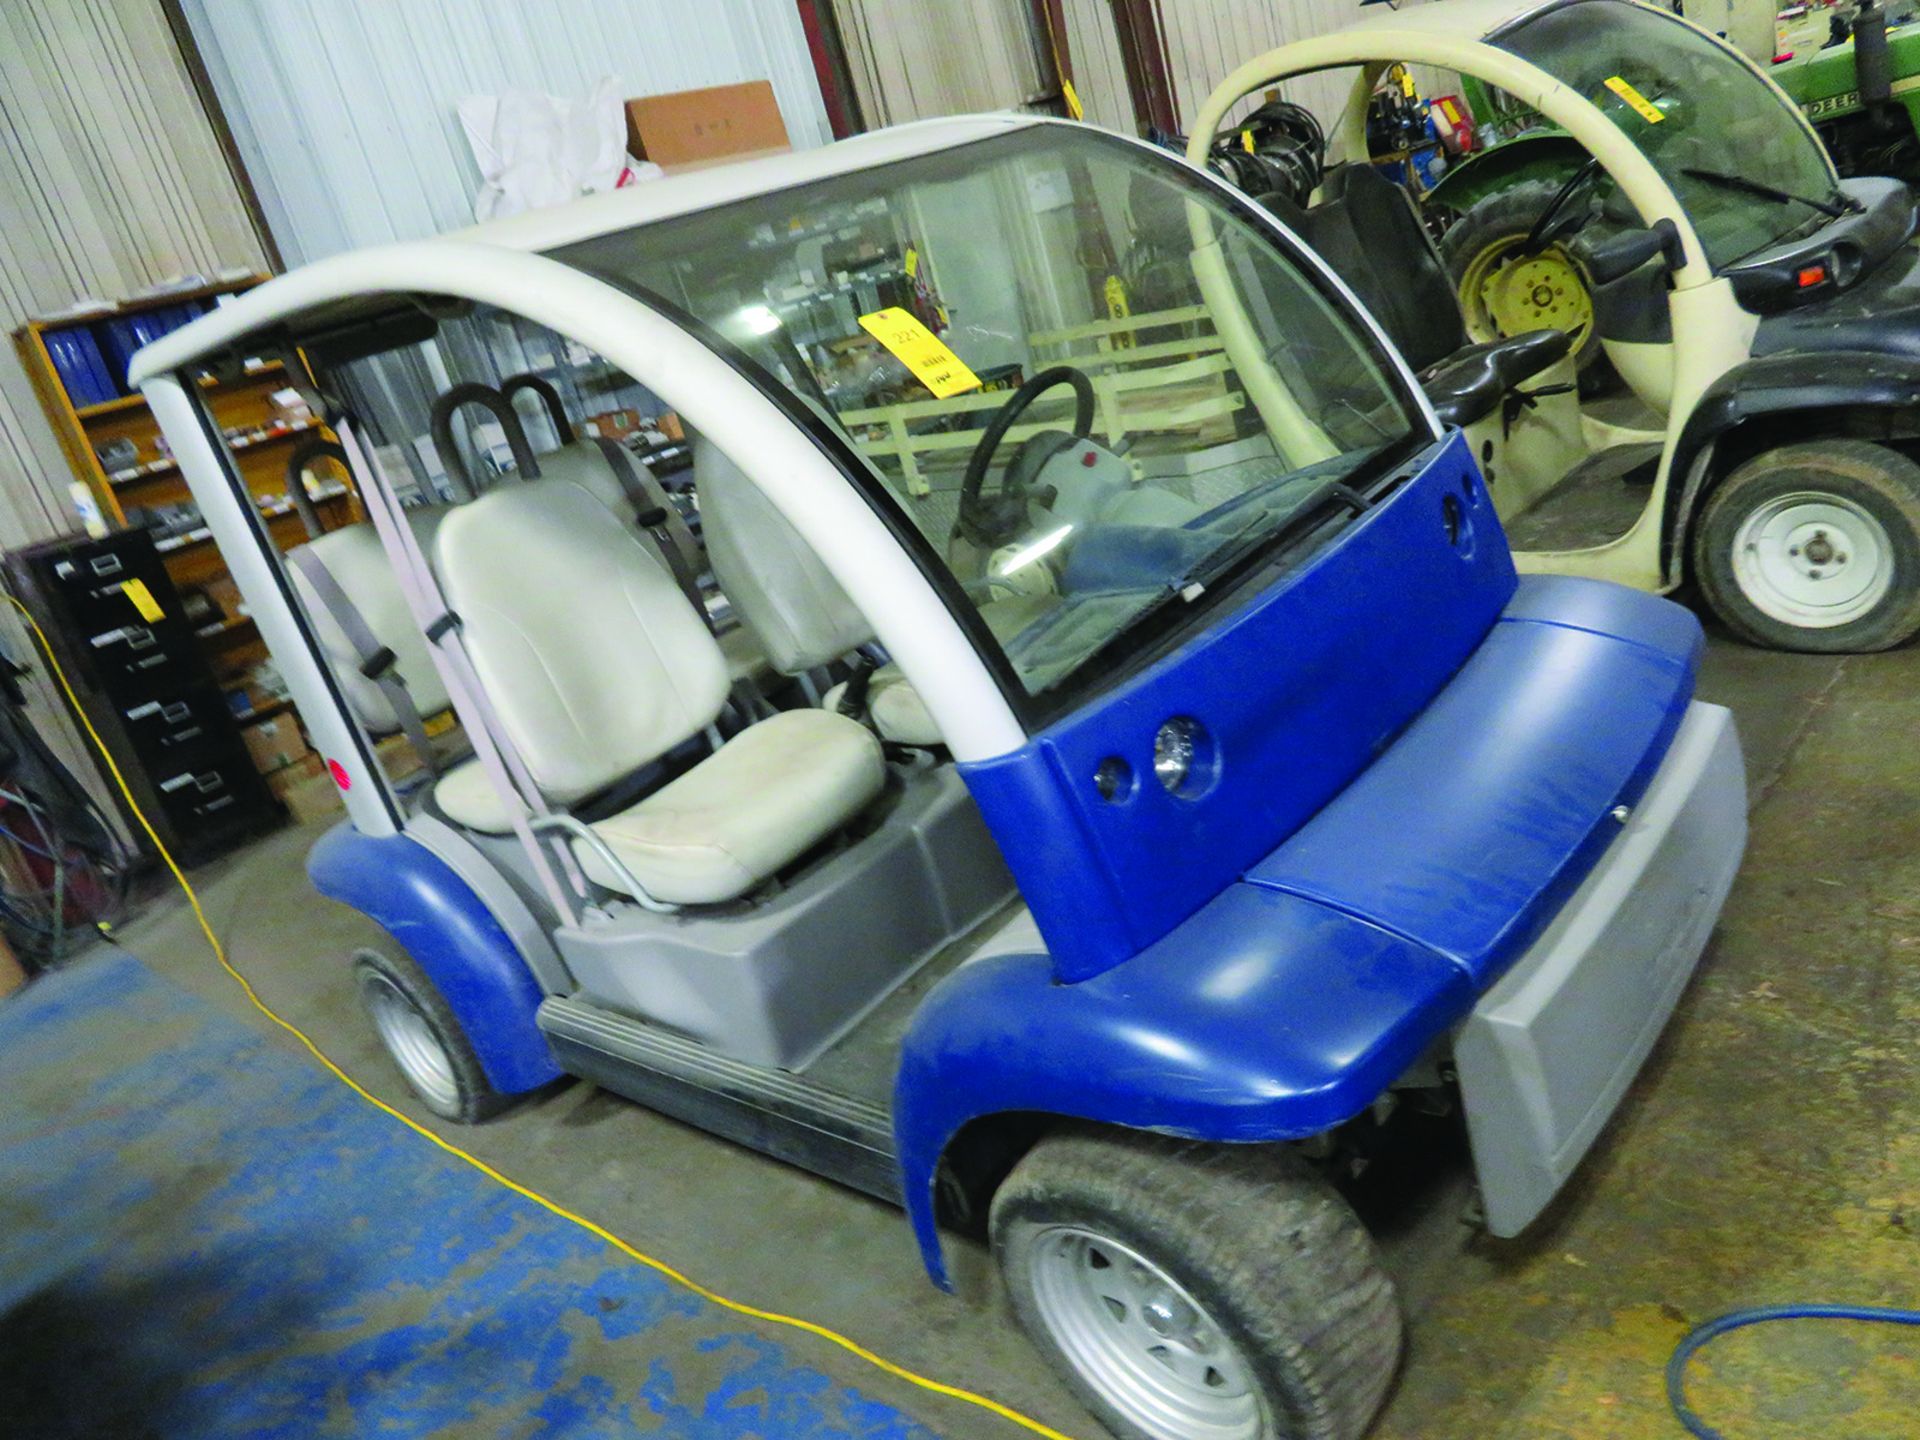 2002 FORD STREET LEGAL 4-SEATER GOLF CART, VIN 1FABP225820104172, POWERED BY A 72 VOLT AIR-COOLED